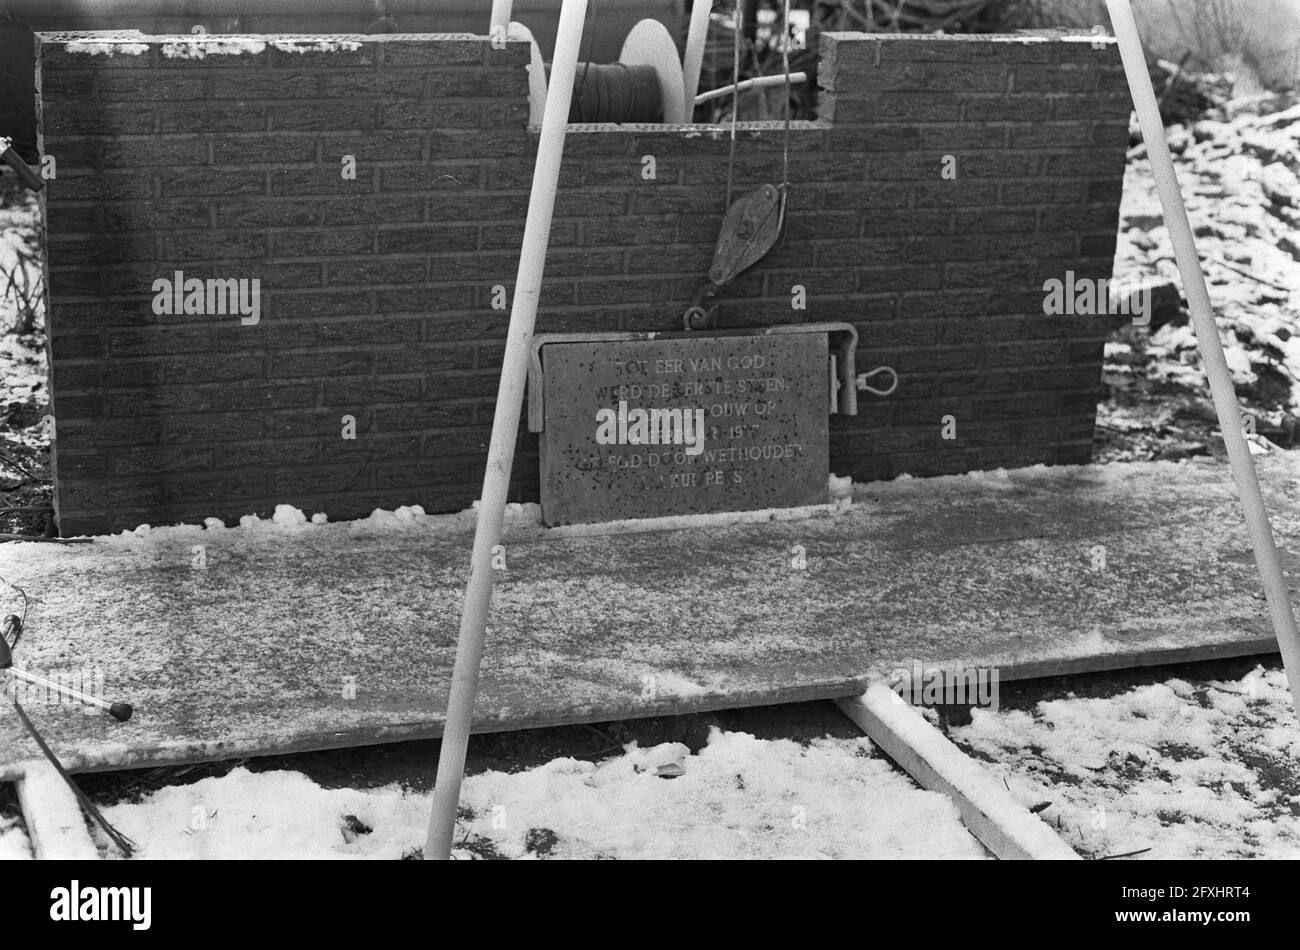 Alderman L.J. Kuypers is laying the first brick for the retirement home De Goodwillburgh of the Salvation Army on Rapenburgerstraat in A'dam, the bricked-in brick, 25 February 1973, retirement homes, brick laying, The Netherlands, 20th century press agency photo, news to remember, documentary, historic photography 1945-1990, visual stories, human history of the Twentieth Century, capturing moments in time Stock Photo